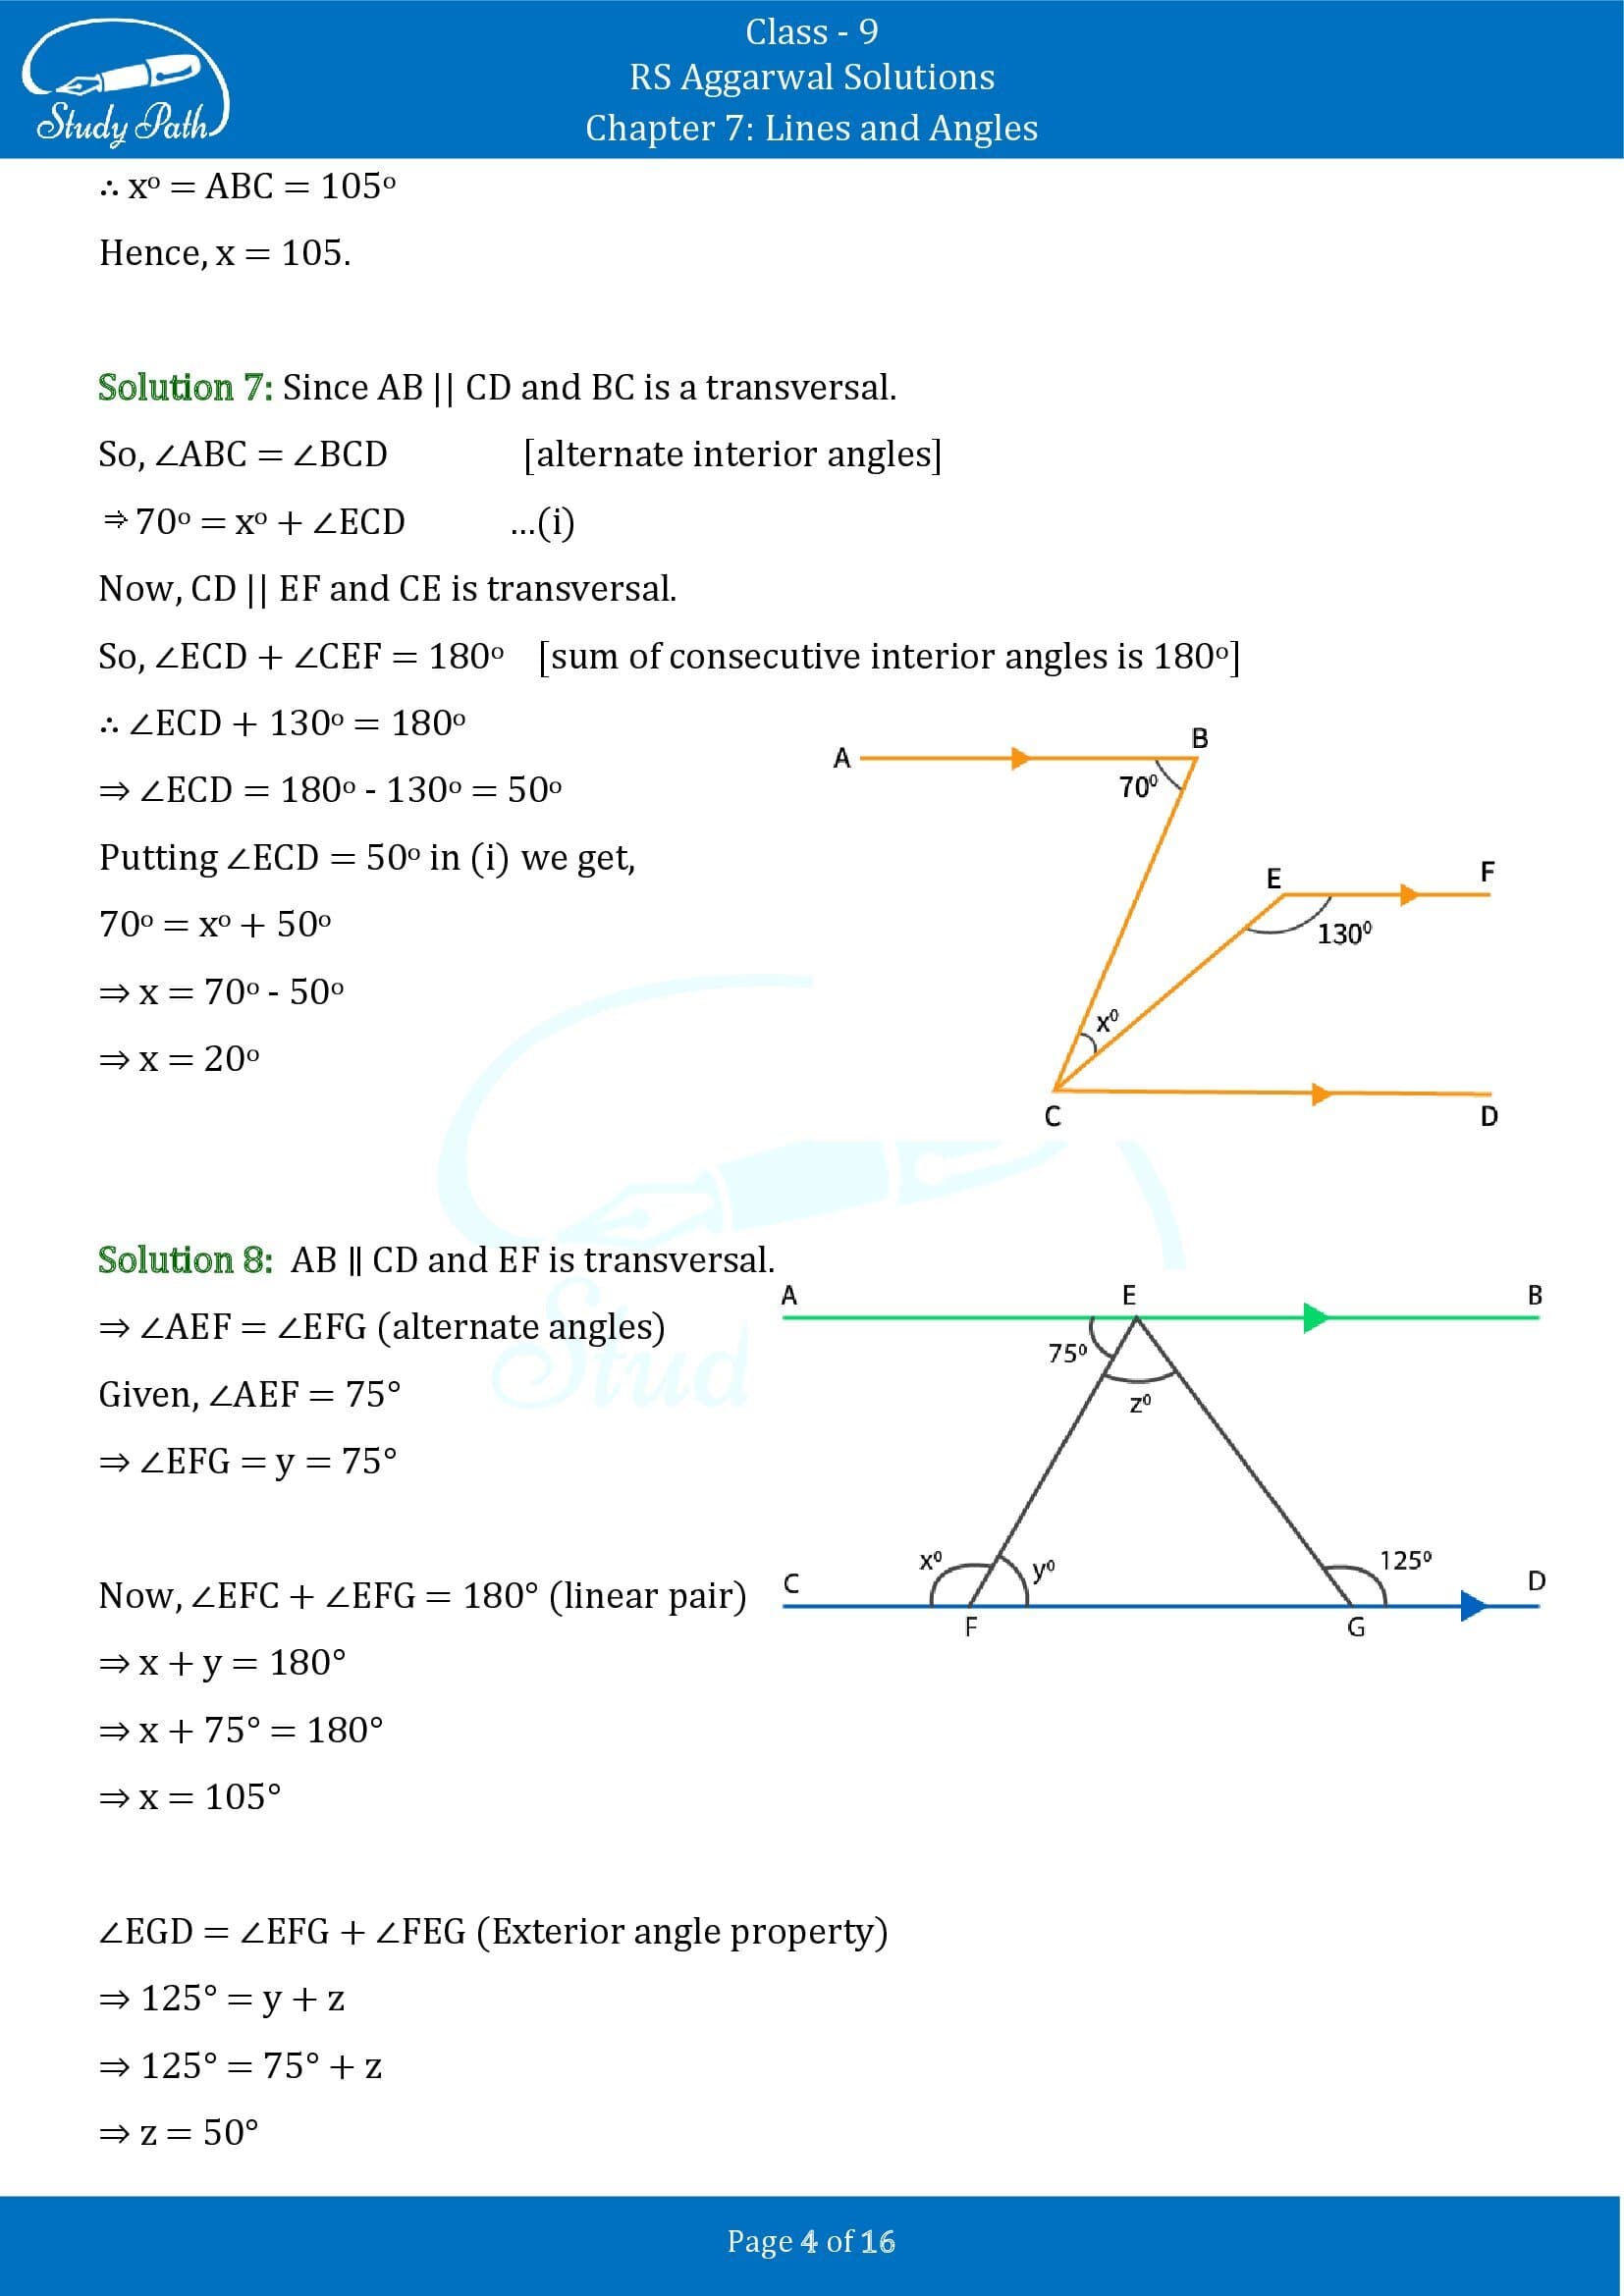 RS Aggarwal Solutions Class 9 Chapter 7 Lines and Angles Exercise 7C 00004